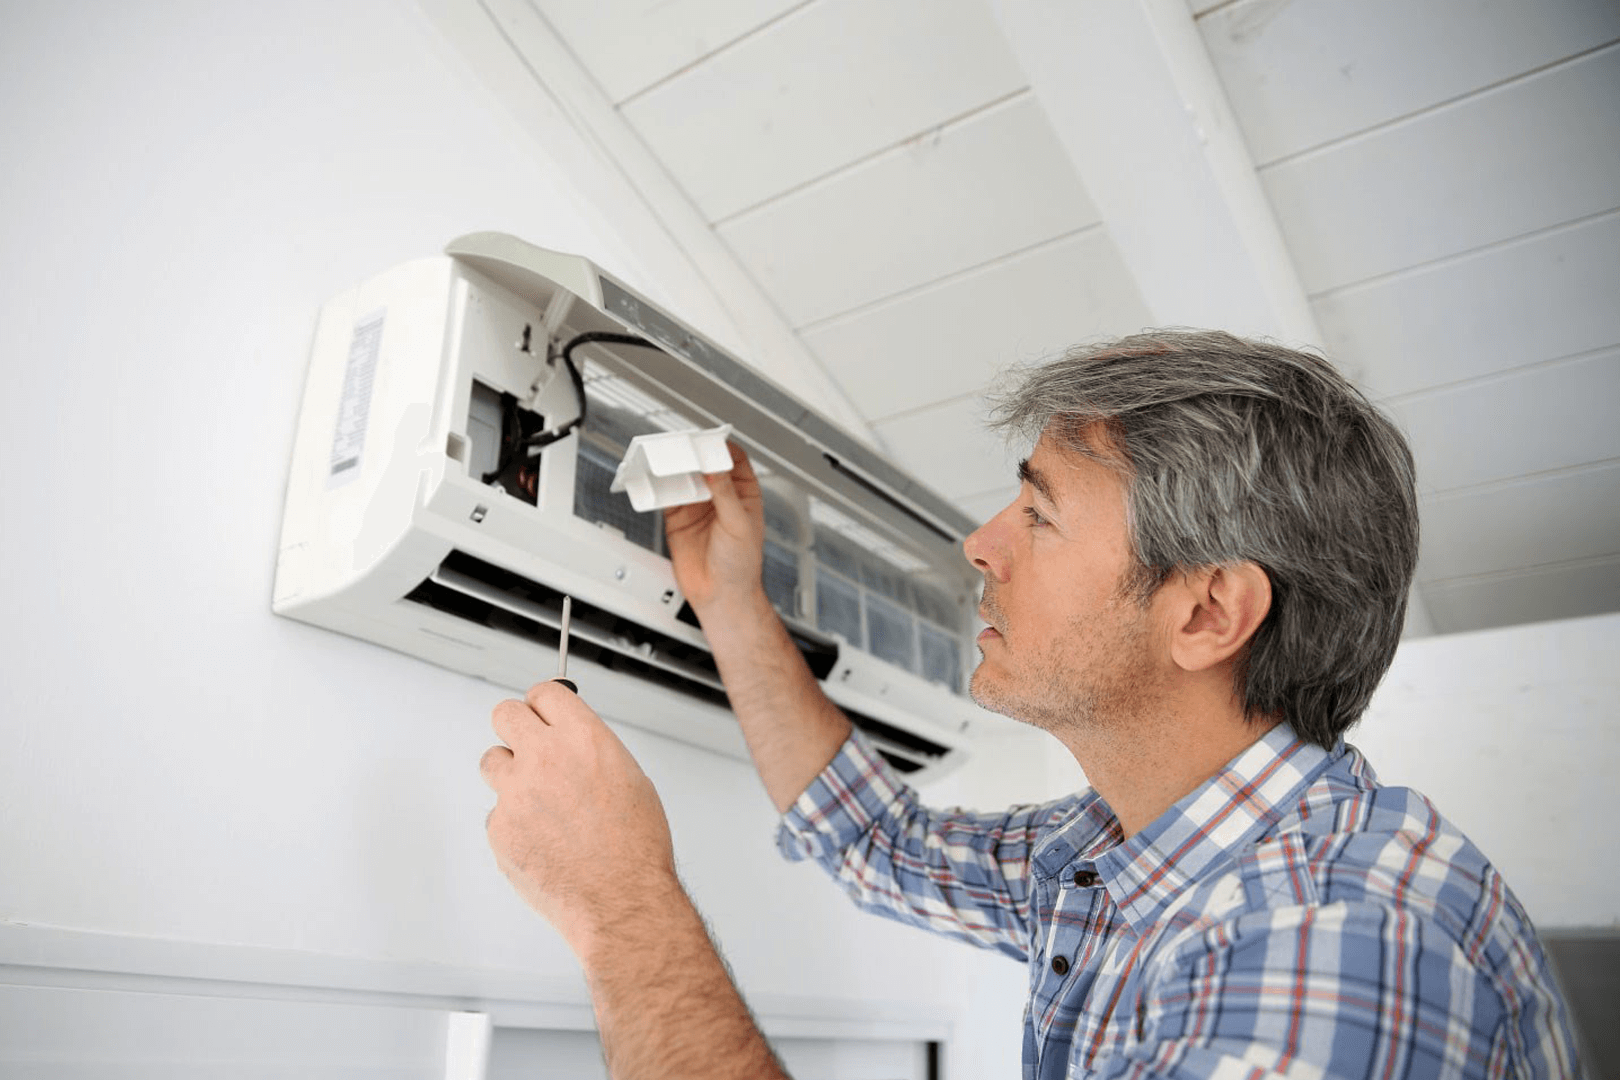 A man adjusting an air conditioner on a wall
